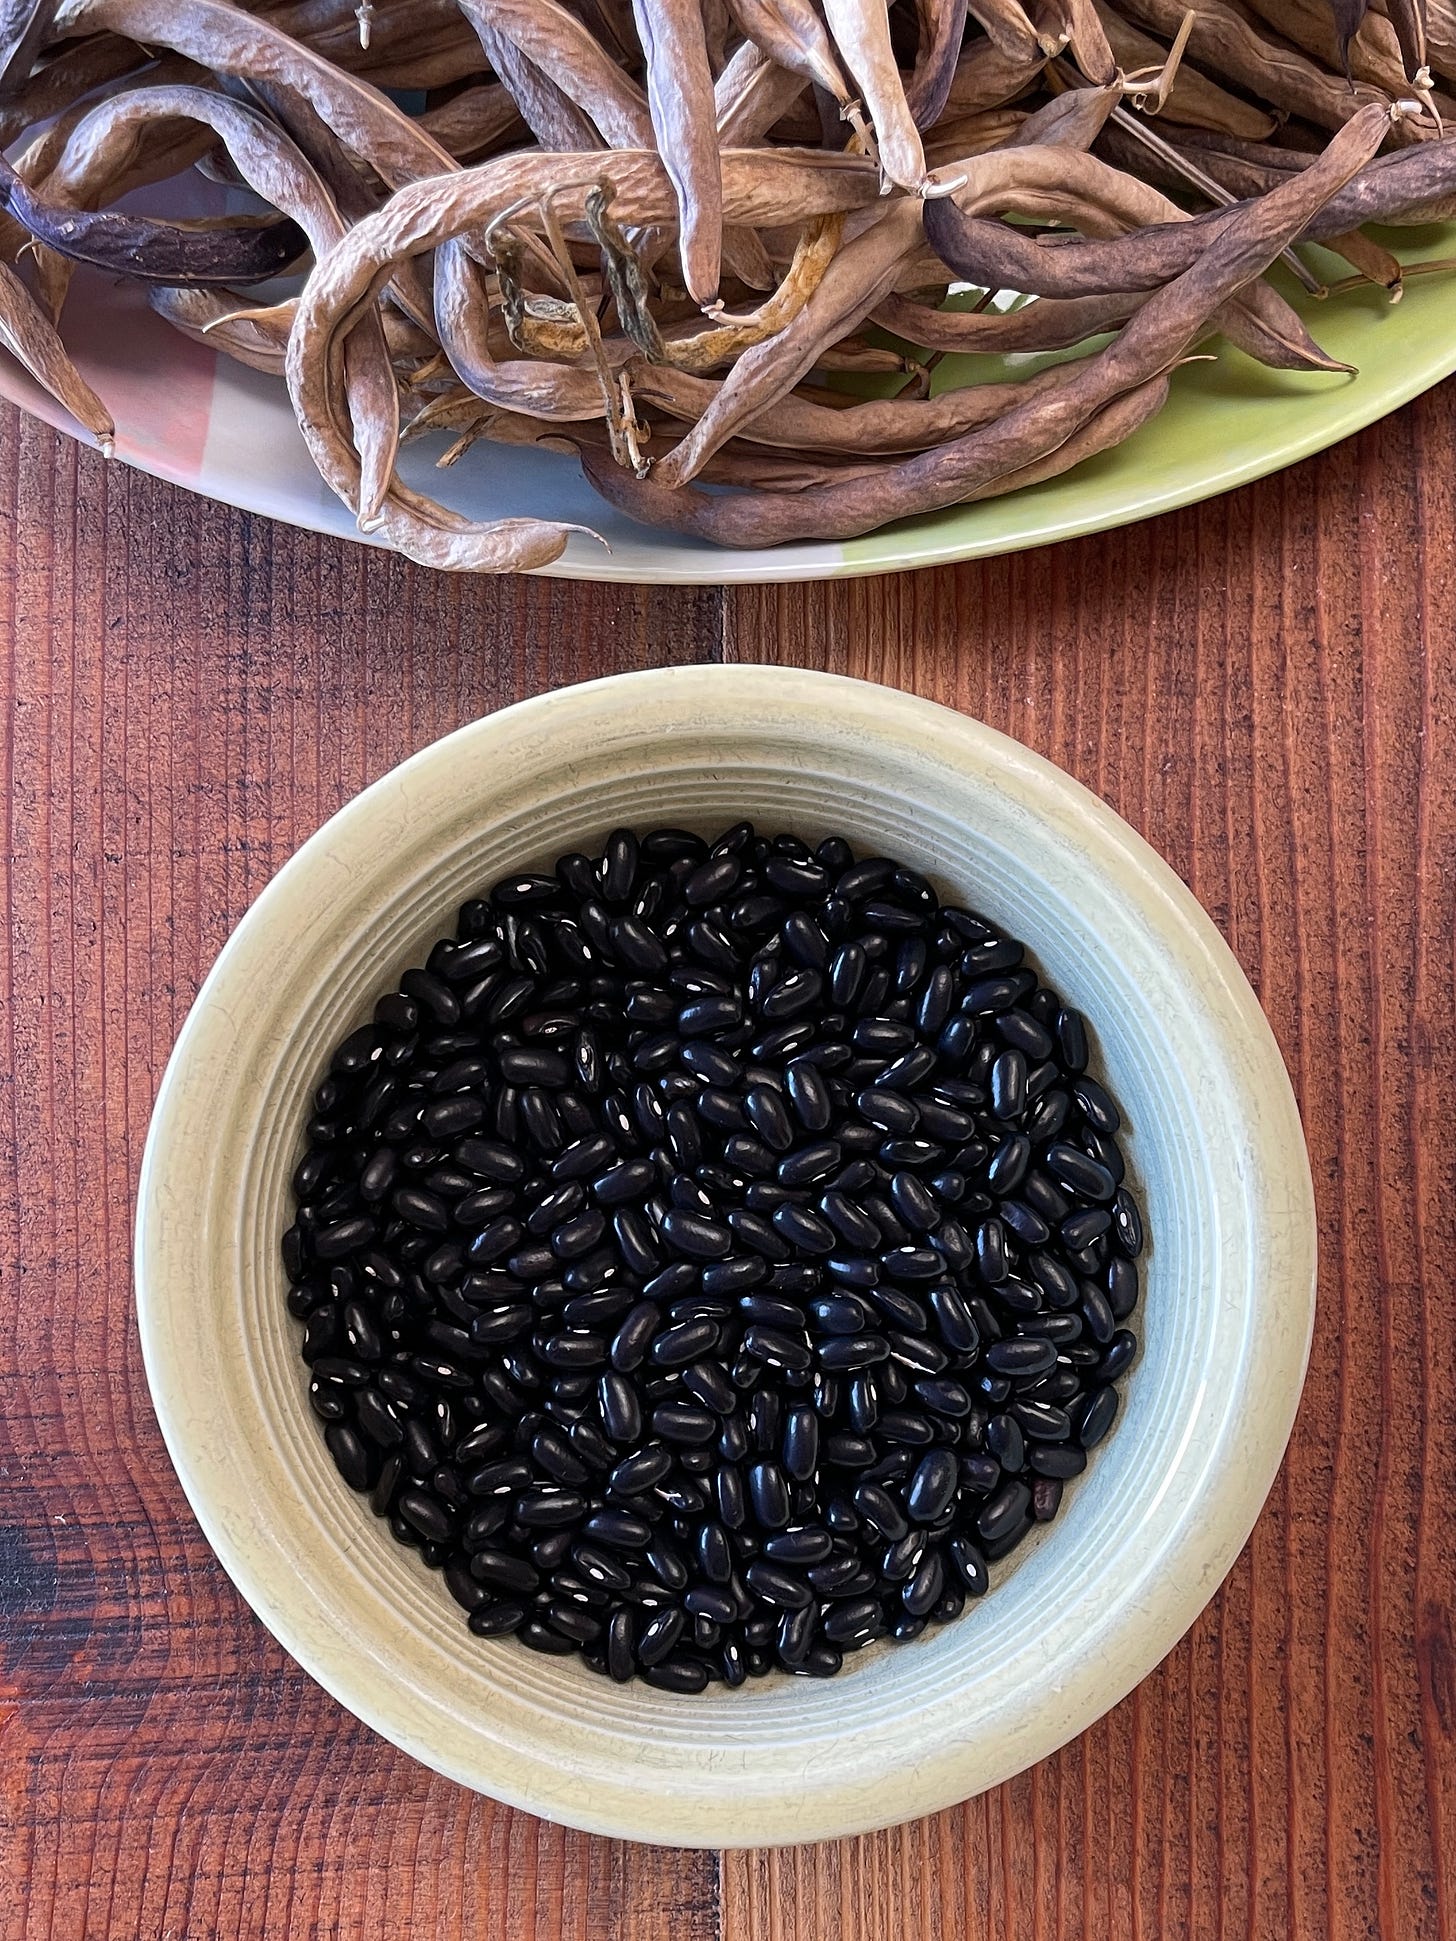 A bowl of harvested black beans sits on a wooden table. Above it are the empty dried pods.